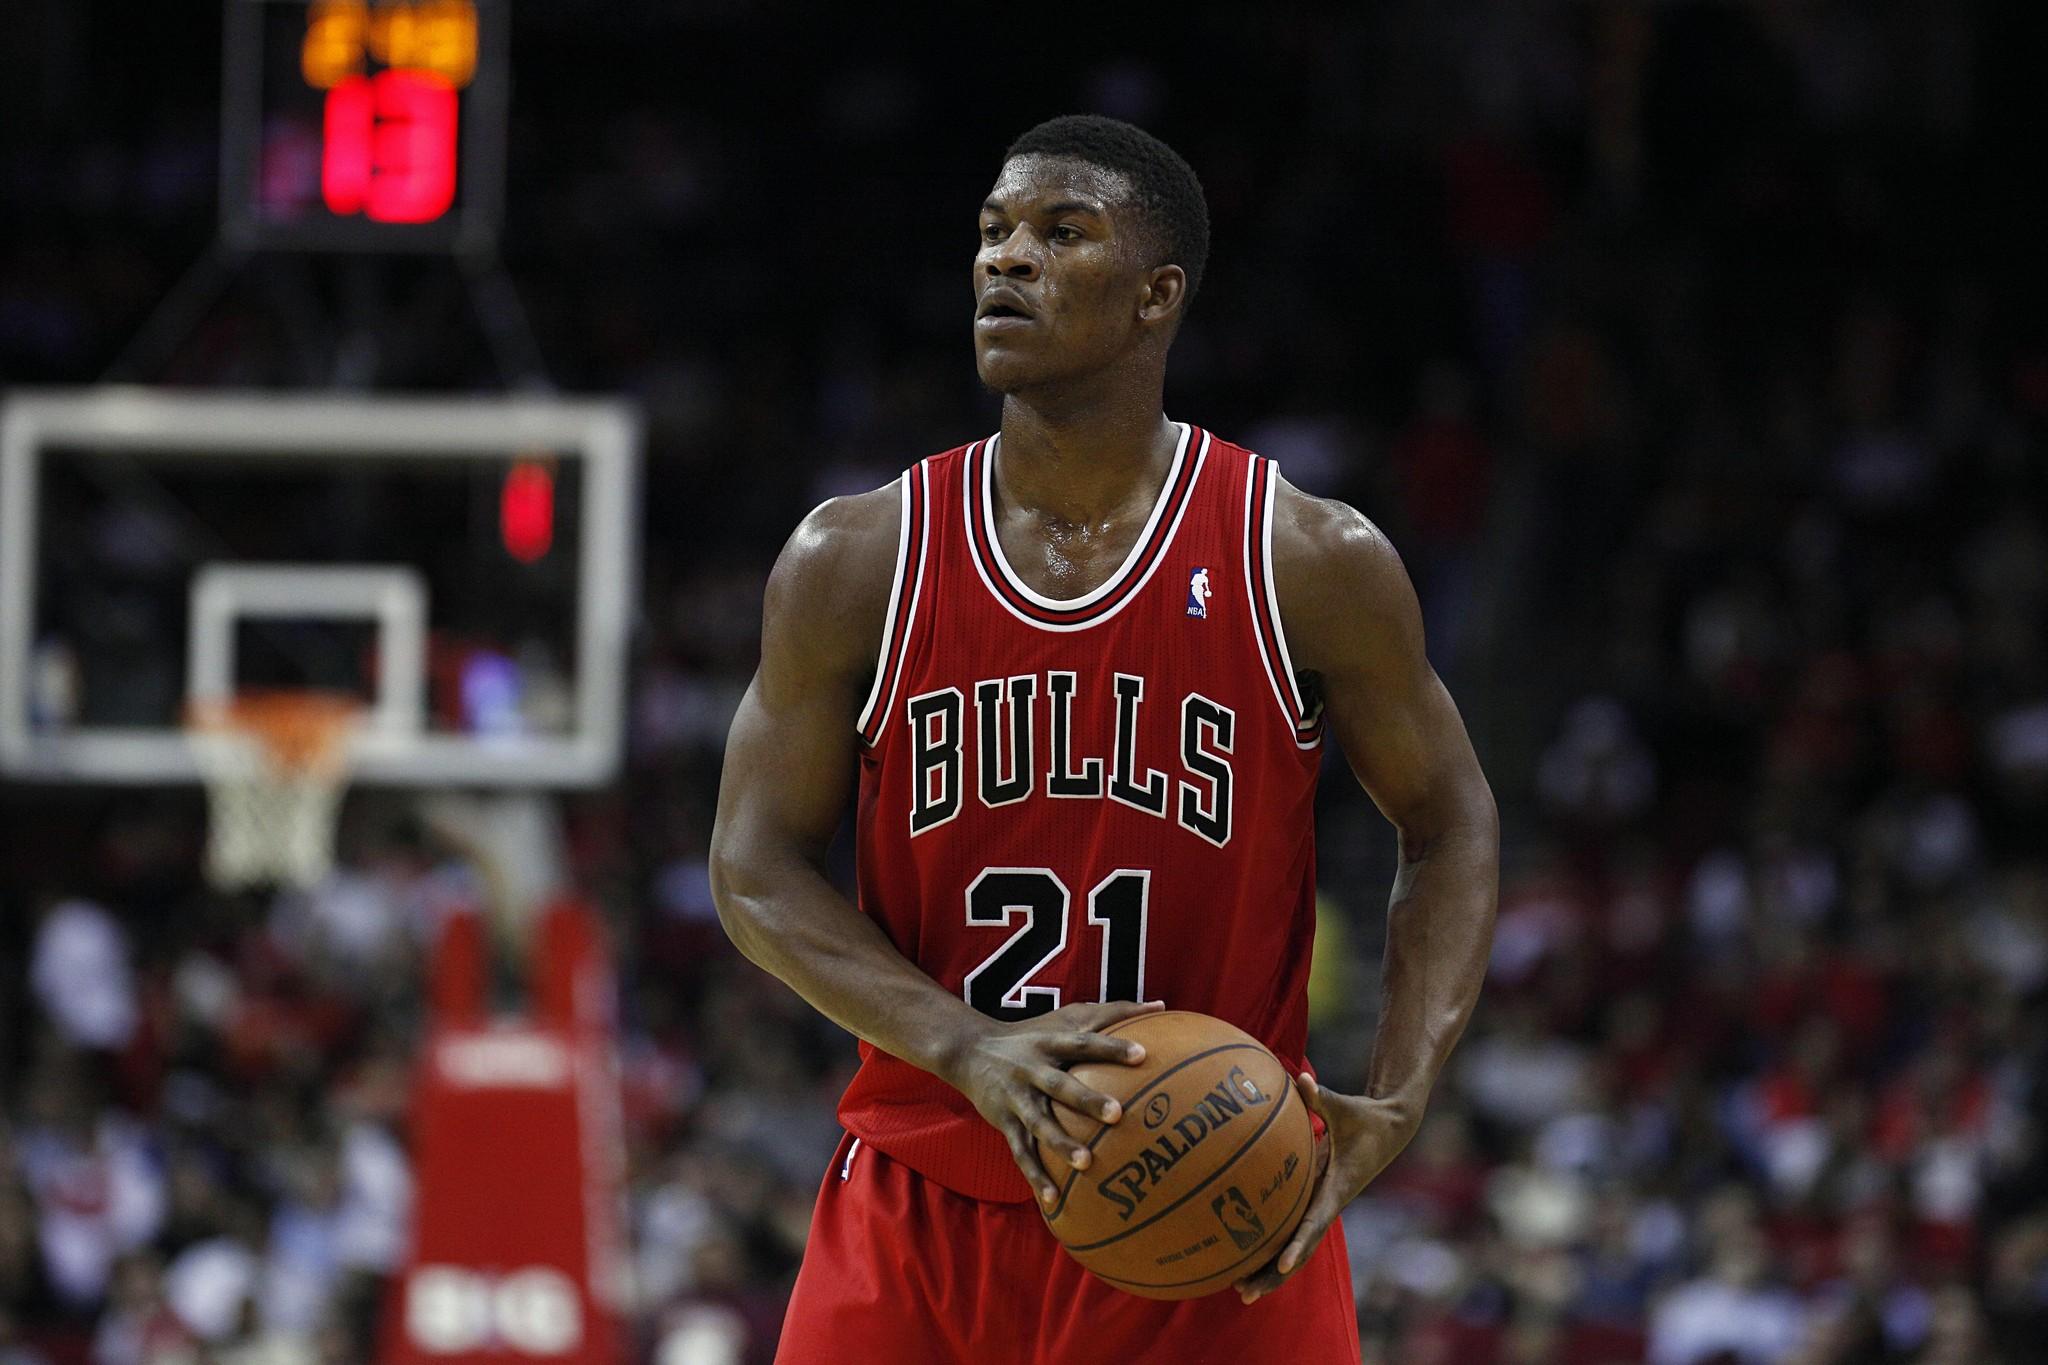 Jimmy Butler Wallpaper High Resolution and Quality Download